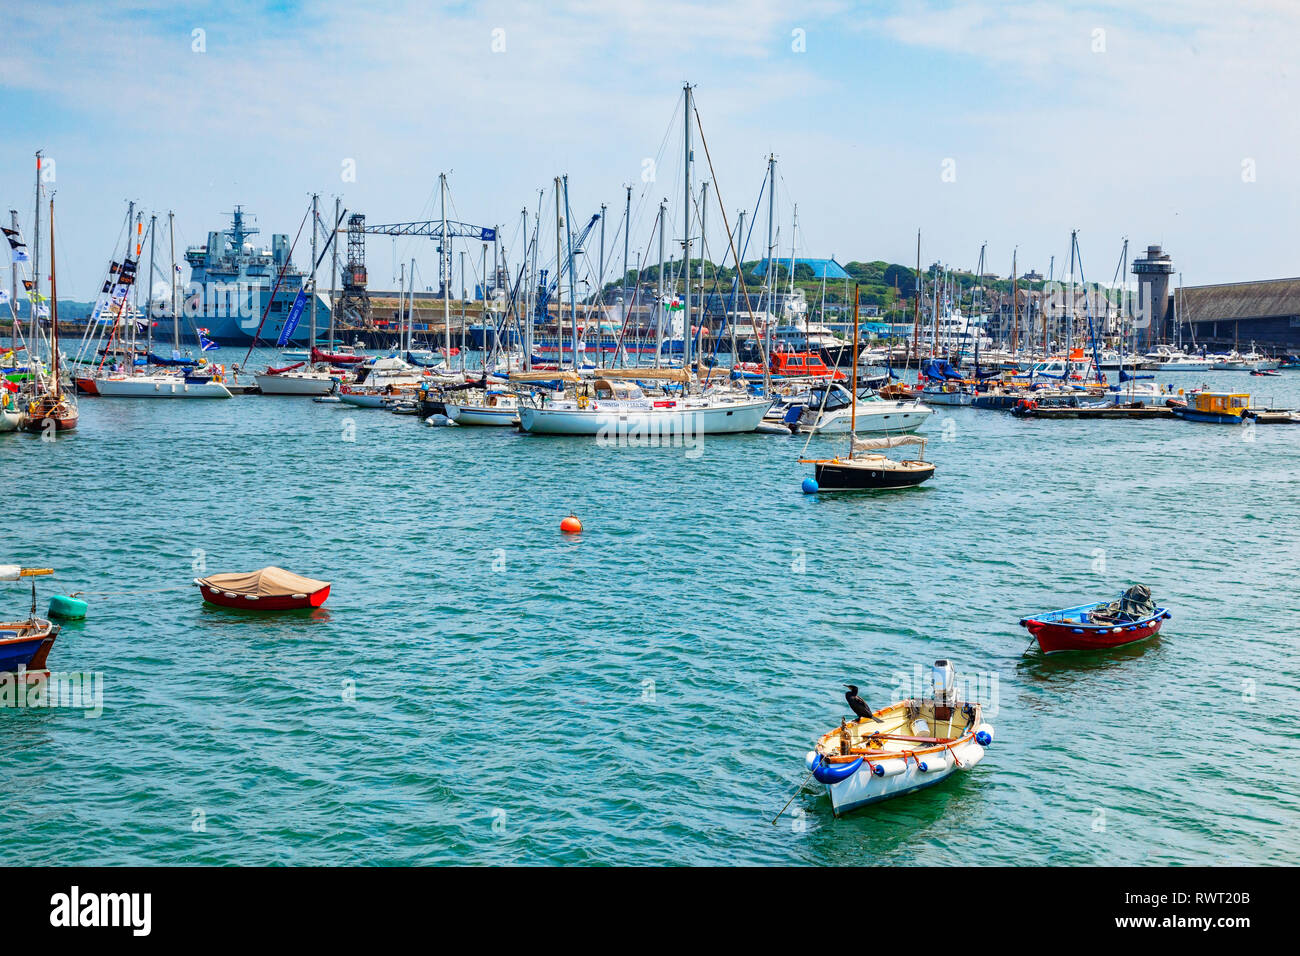 12 June 2018: Falmouth, Cornwall, UK - The harbour, with its mix of naval and civilian boats and ships. Stock Photo